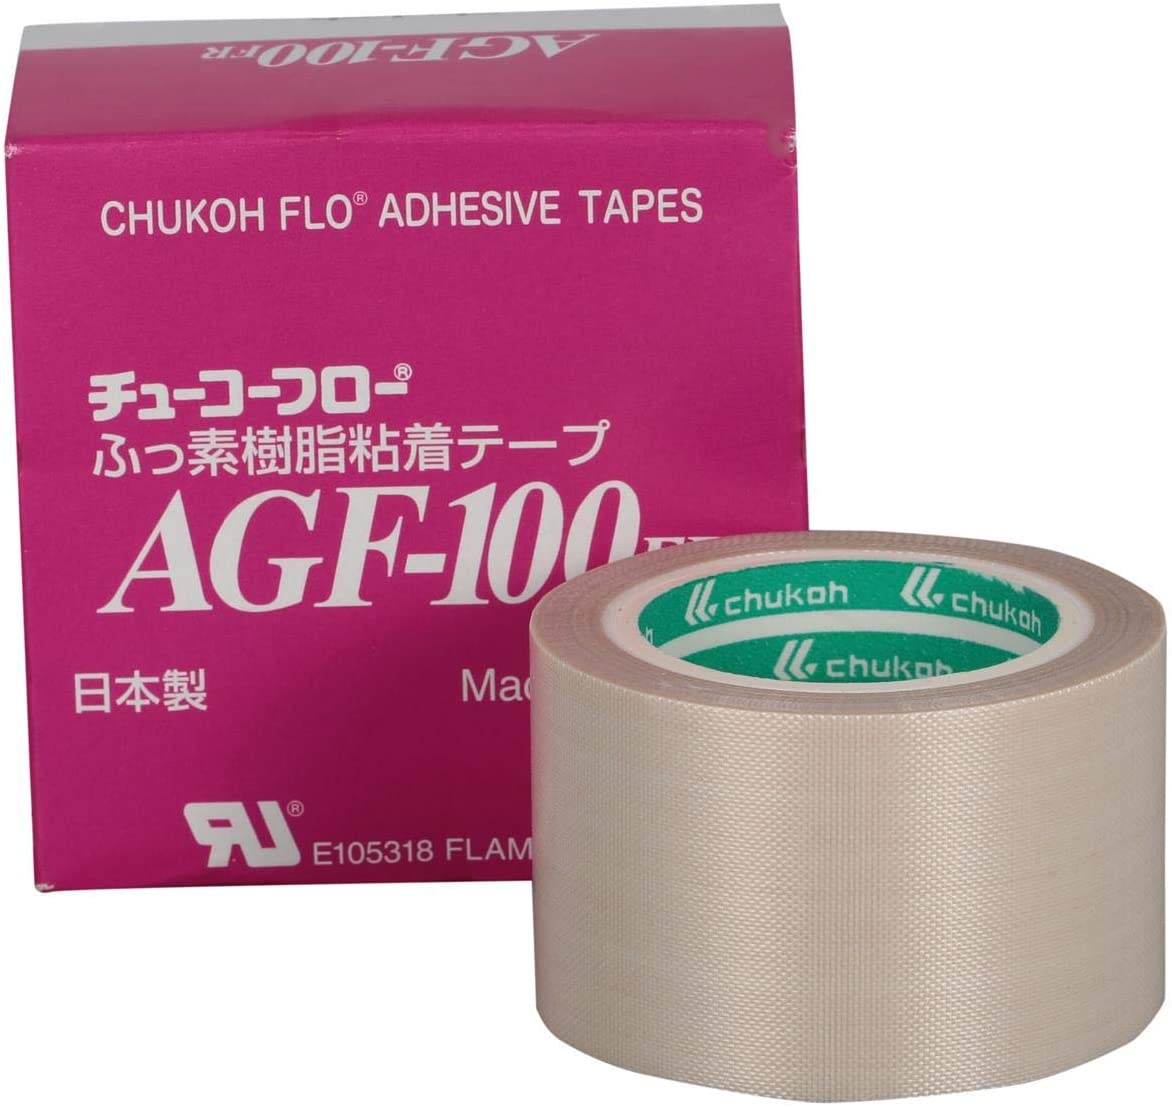 AGF-100 Adhesive Tape 50mm - Made In Japan